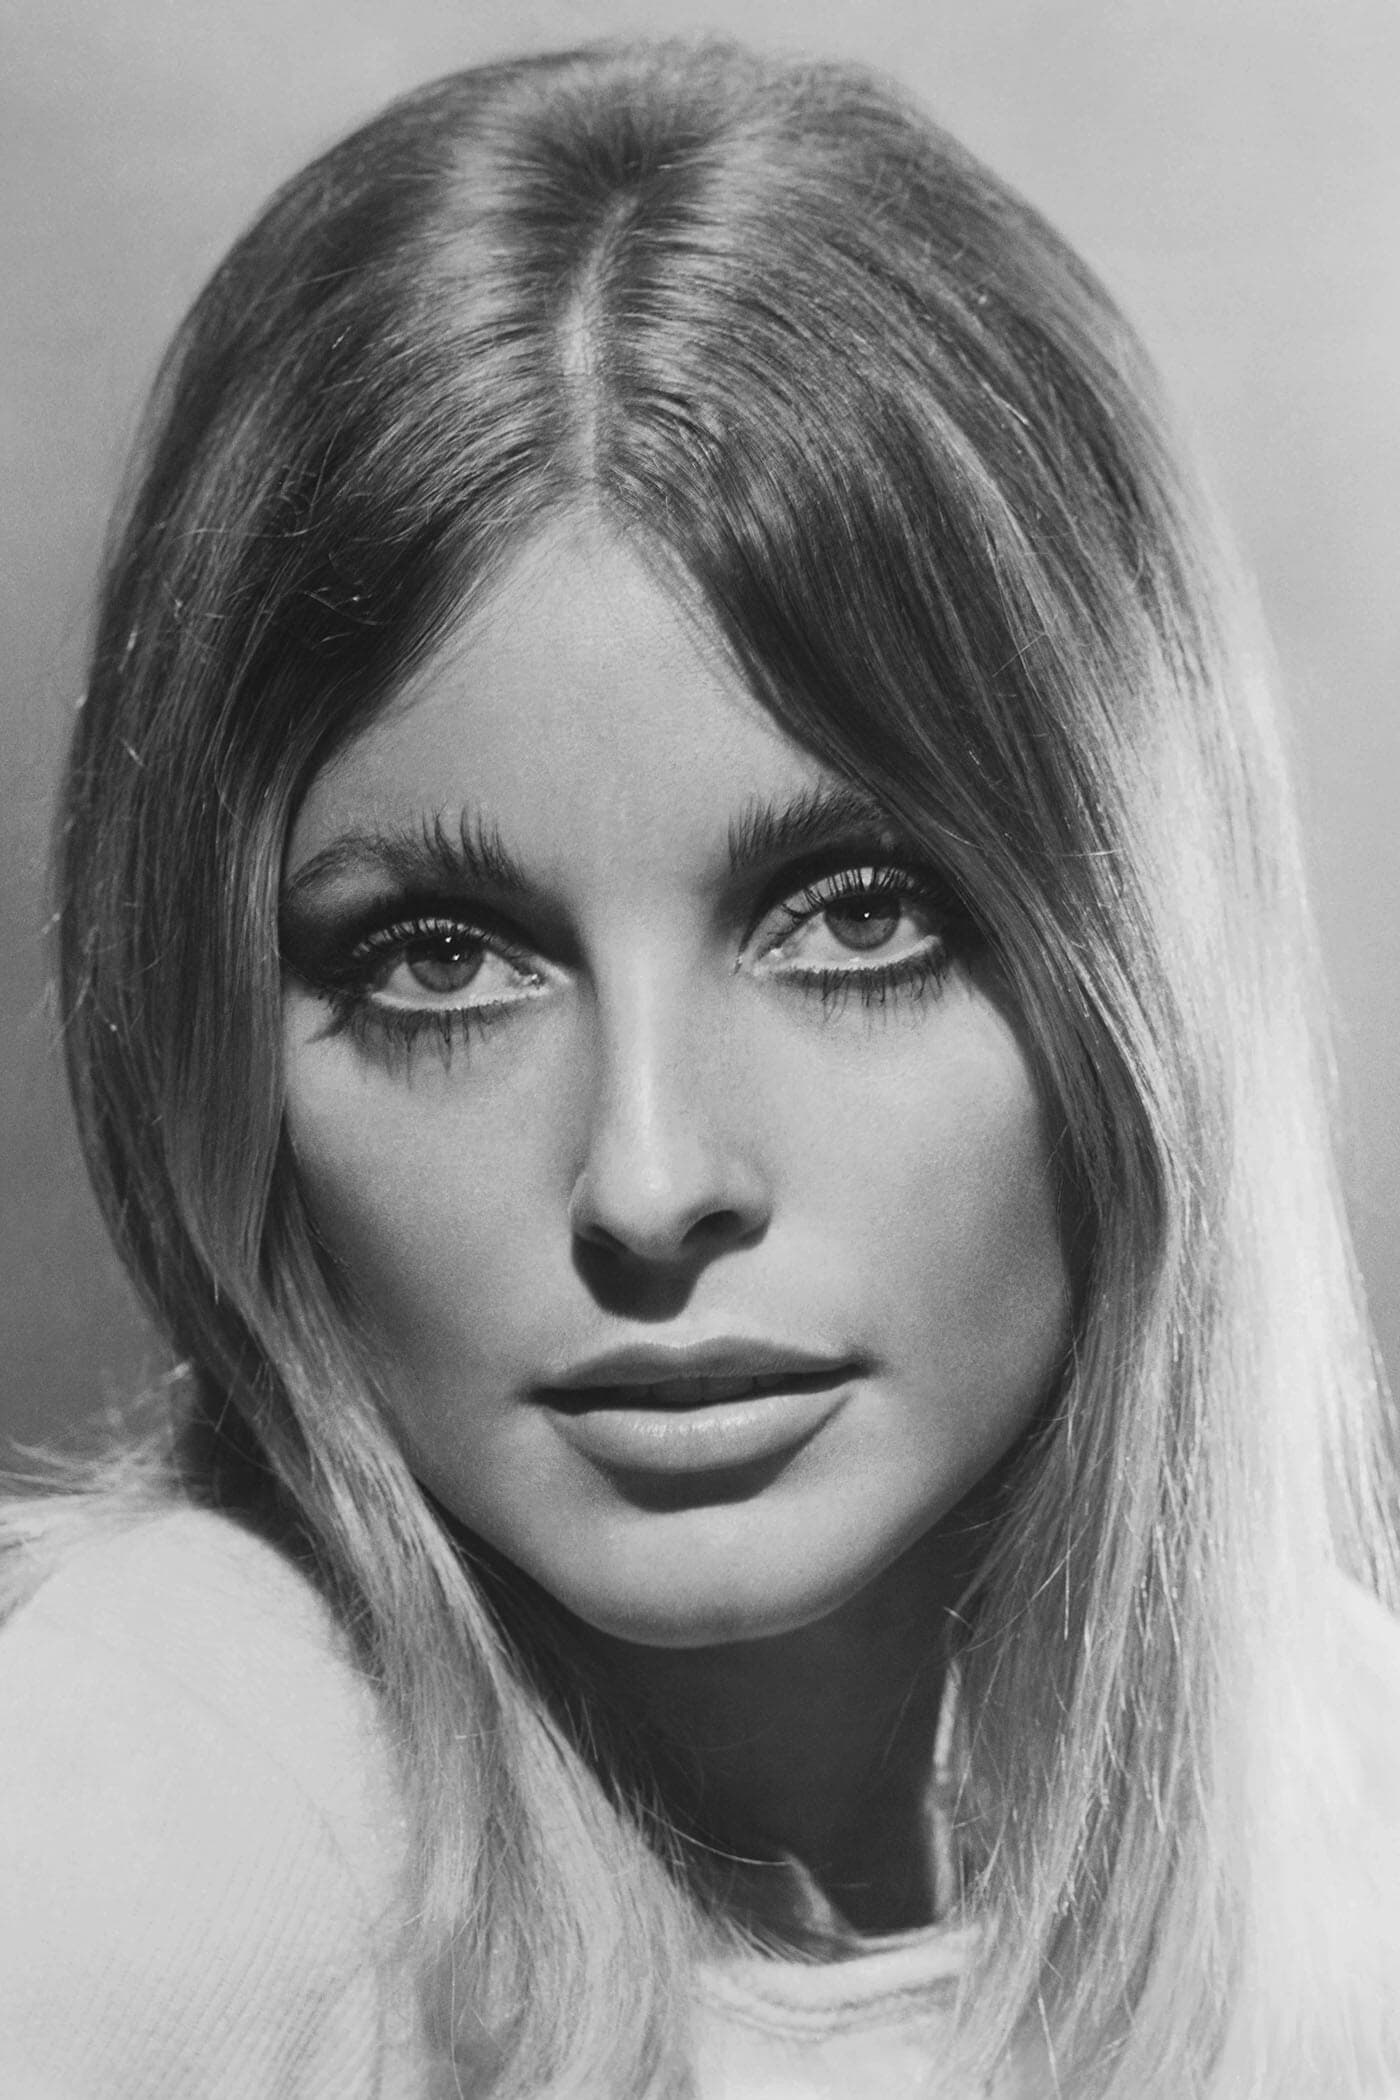 Sharon Tate | Patrician in Arena (uncredited)